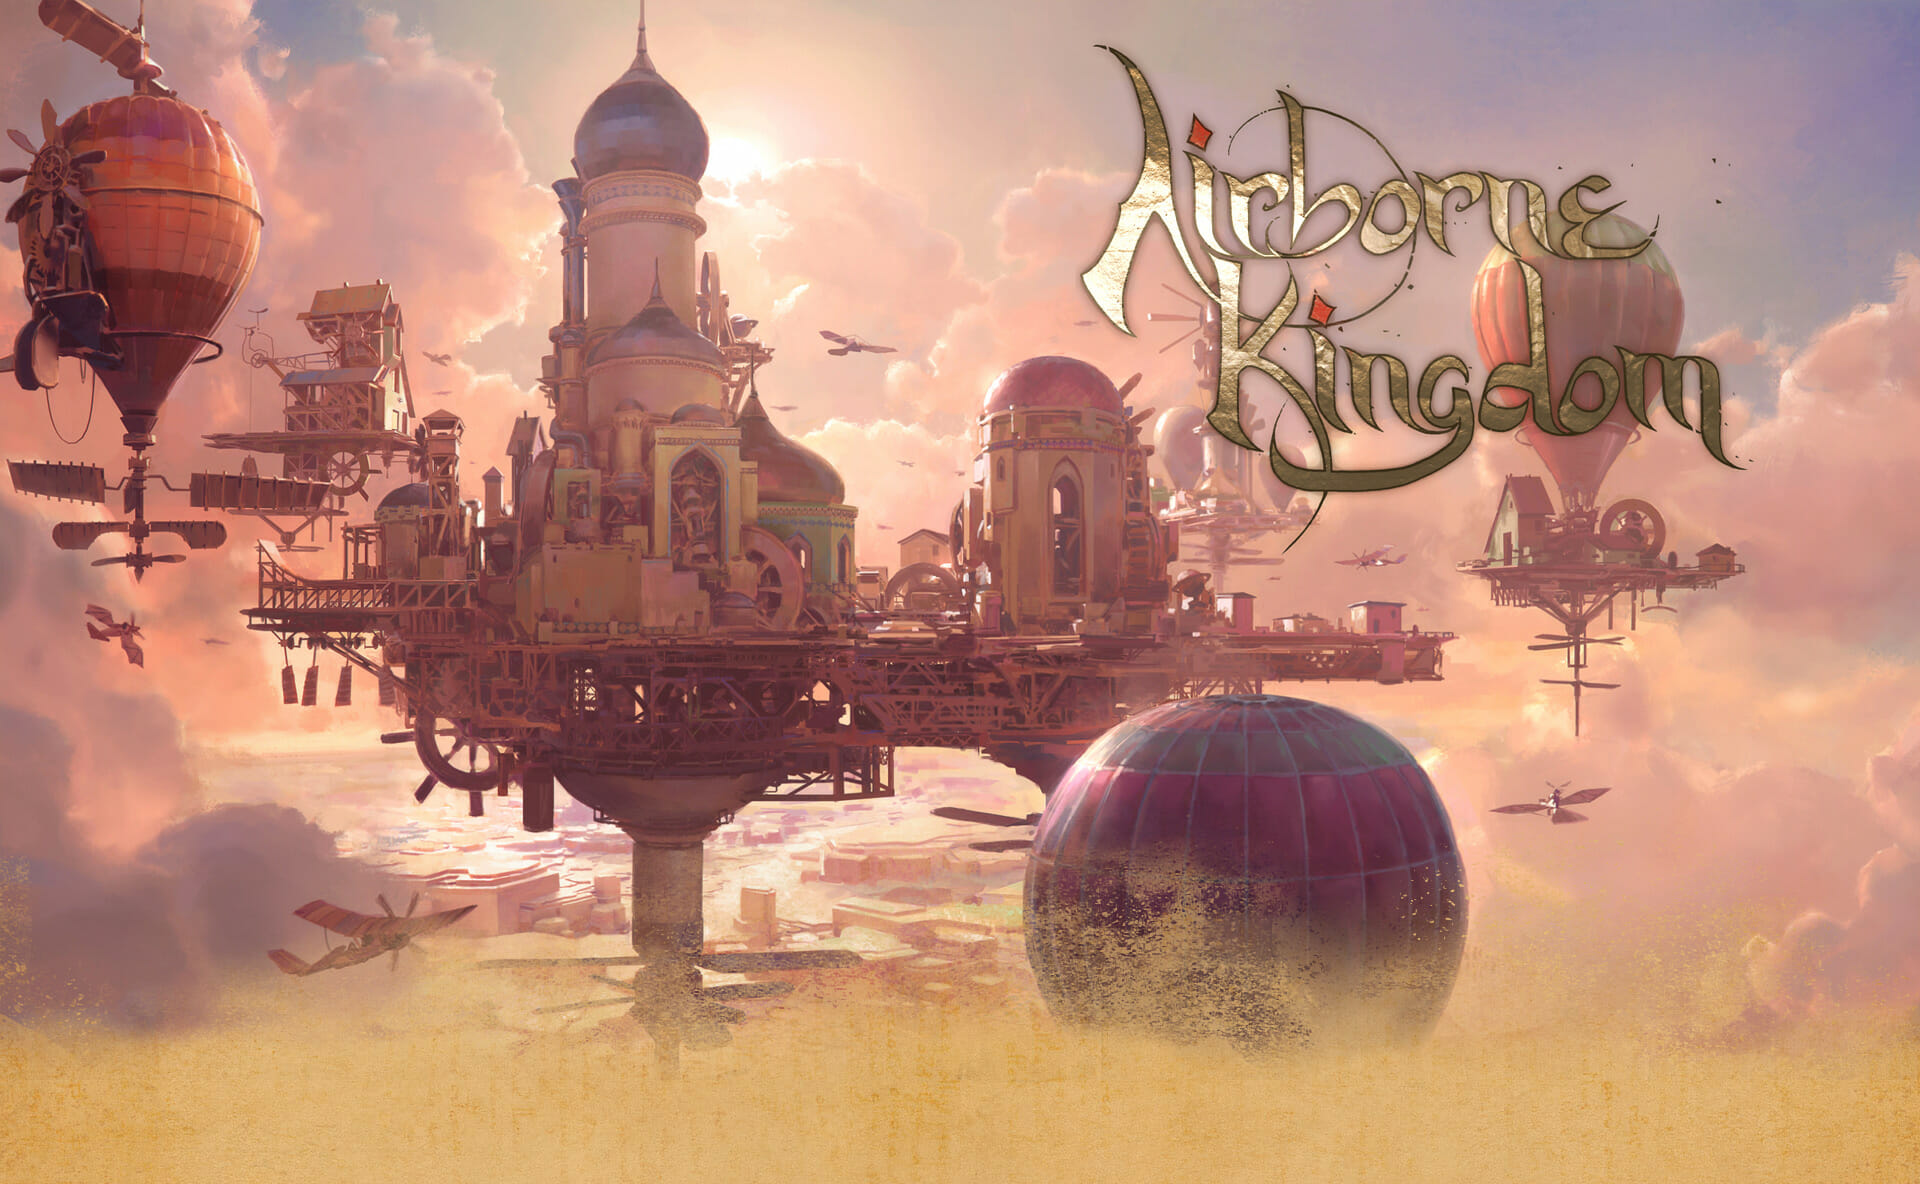 Airborne Kingdom System Requirements